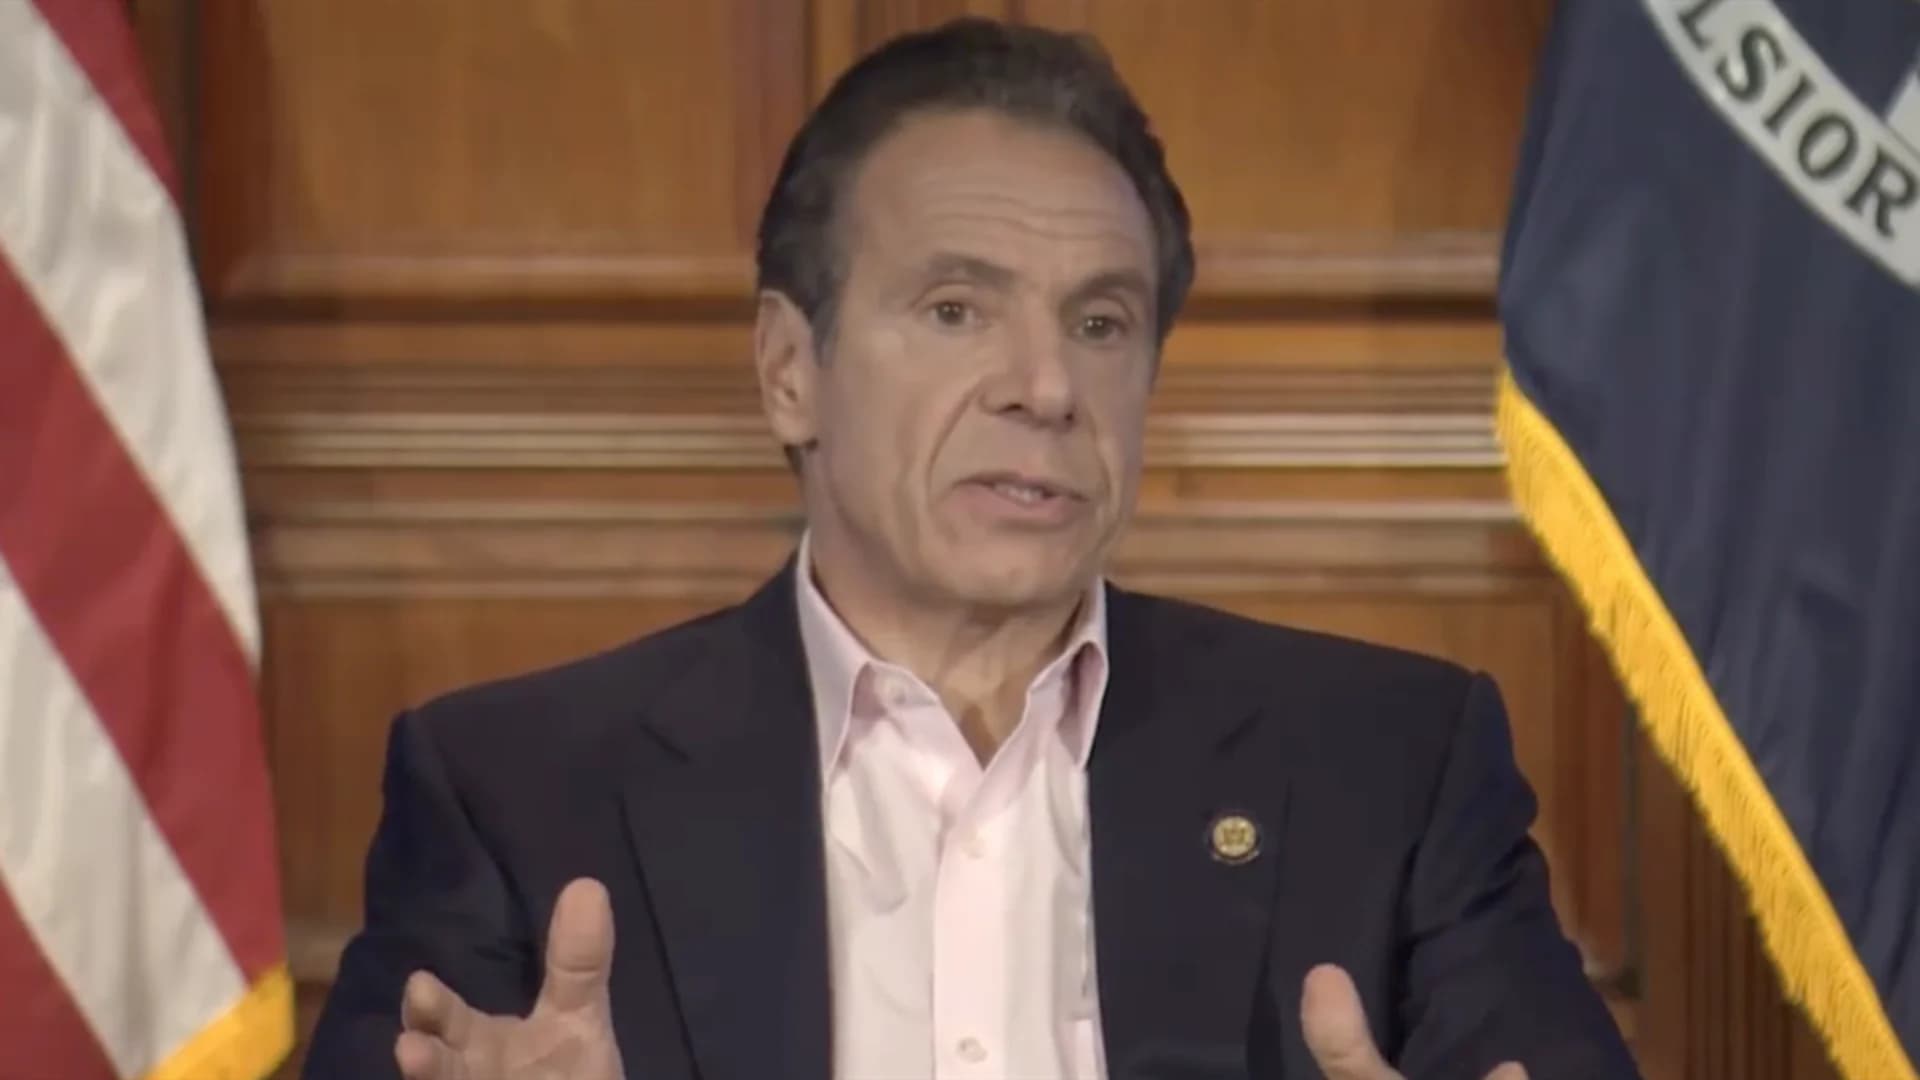 Cuomo offers broad reopening outline, says some upstate businesses may reopen around May 15